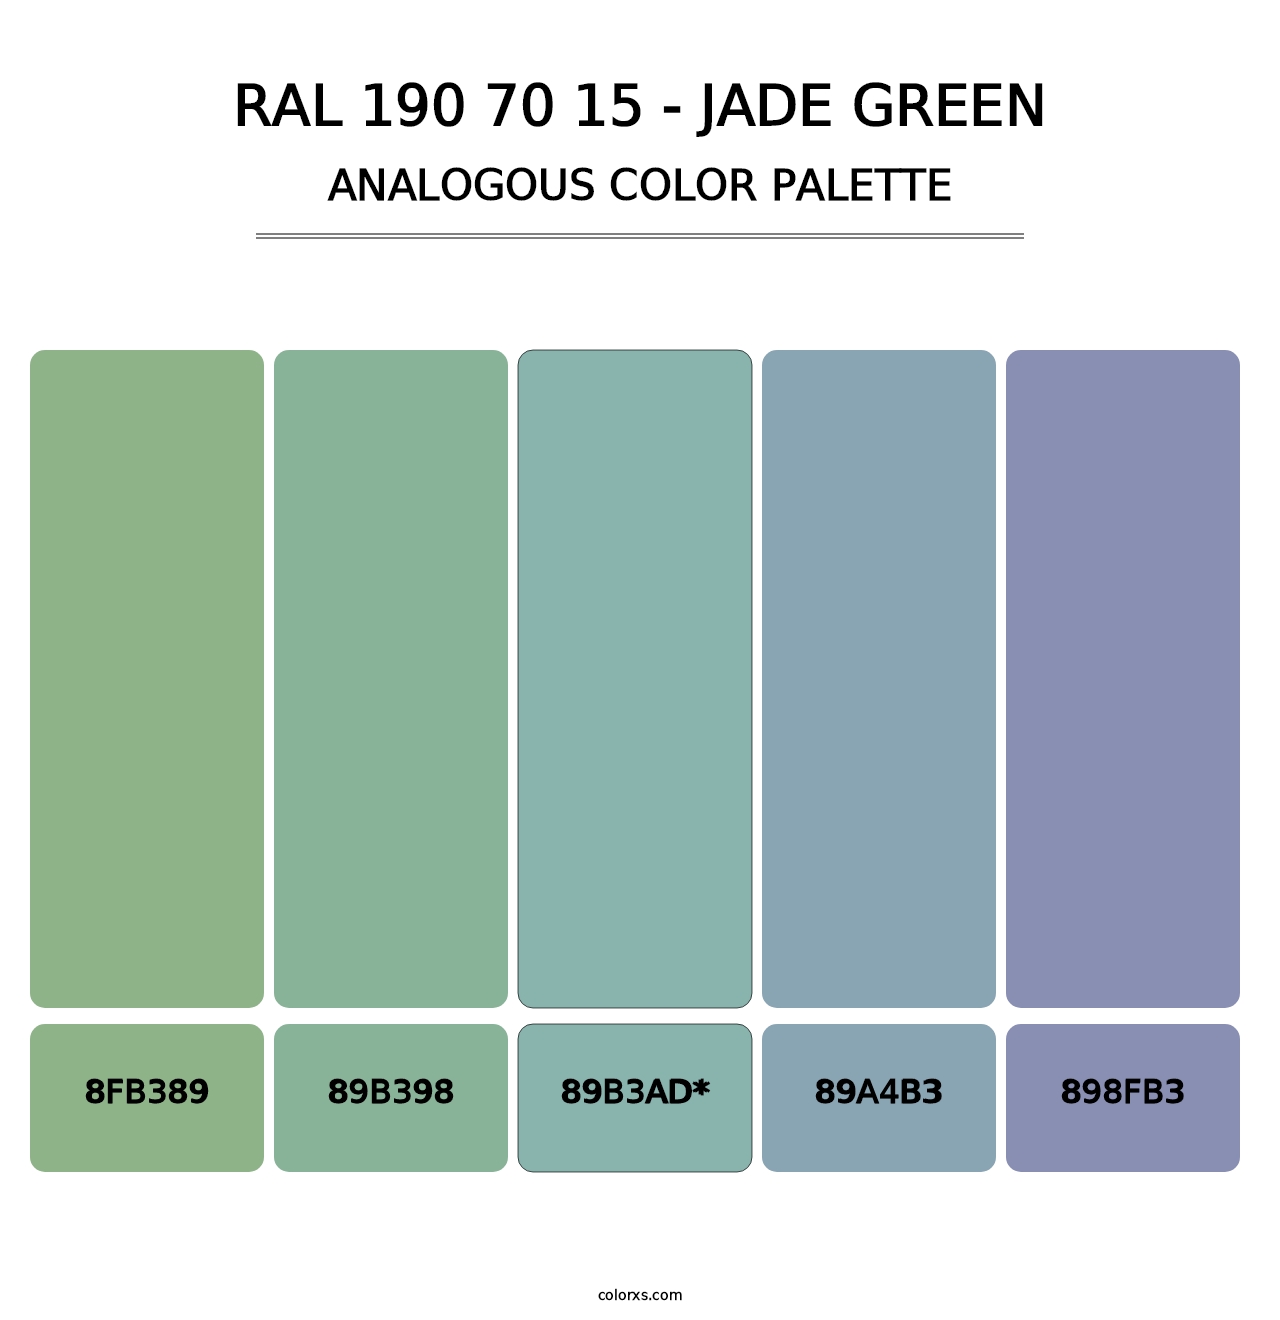 RAL 190 70 15 - Jade Green - Analogous Color Palette